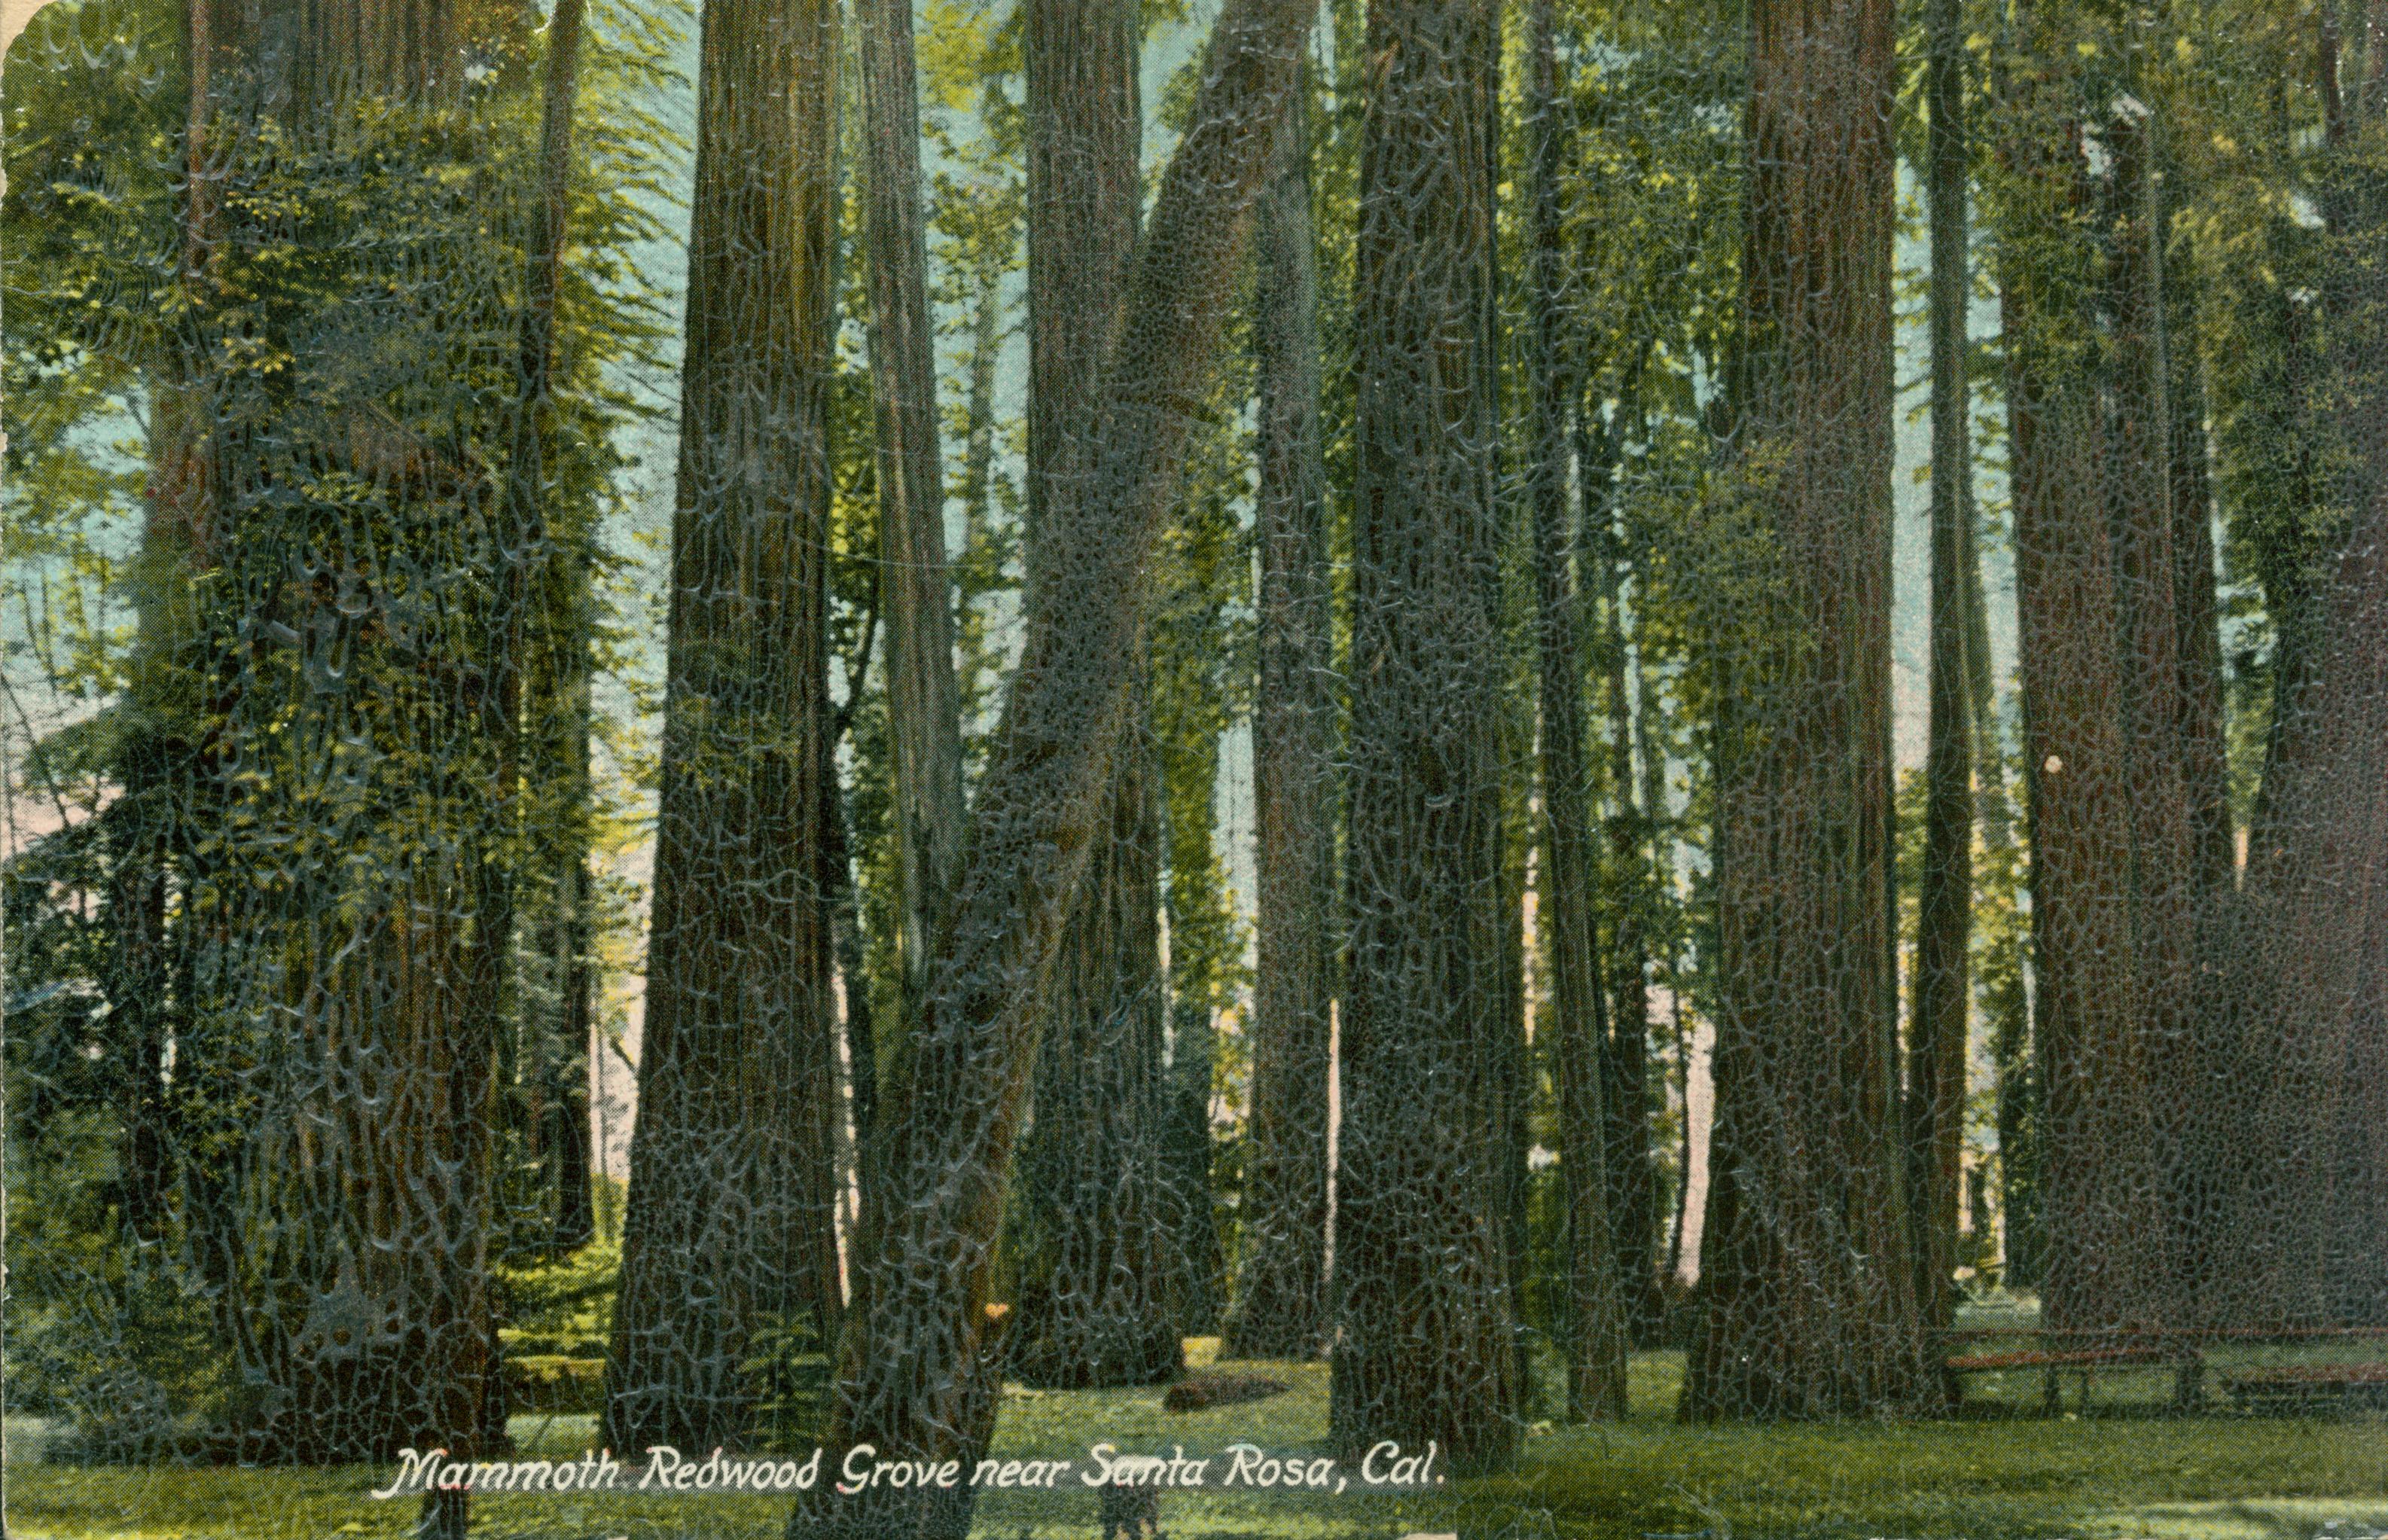 Shows a grove of redwood trees